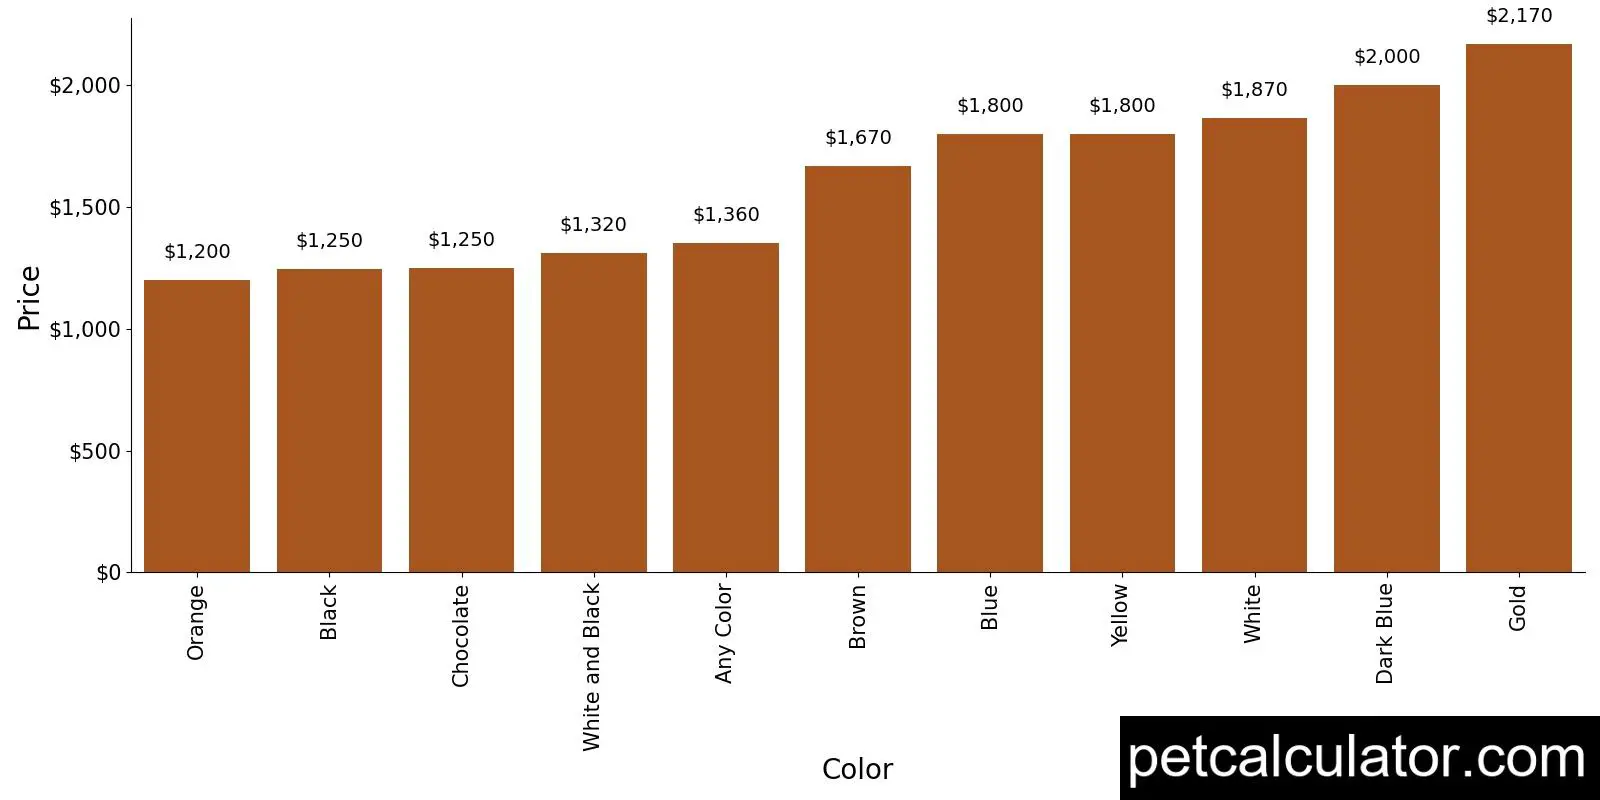 Price of Dalmatian by Color 